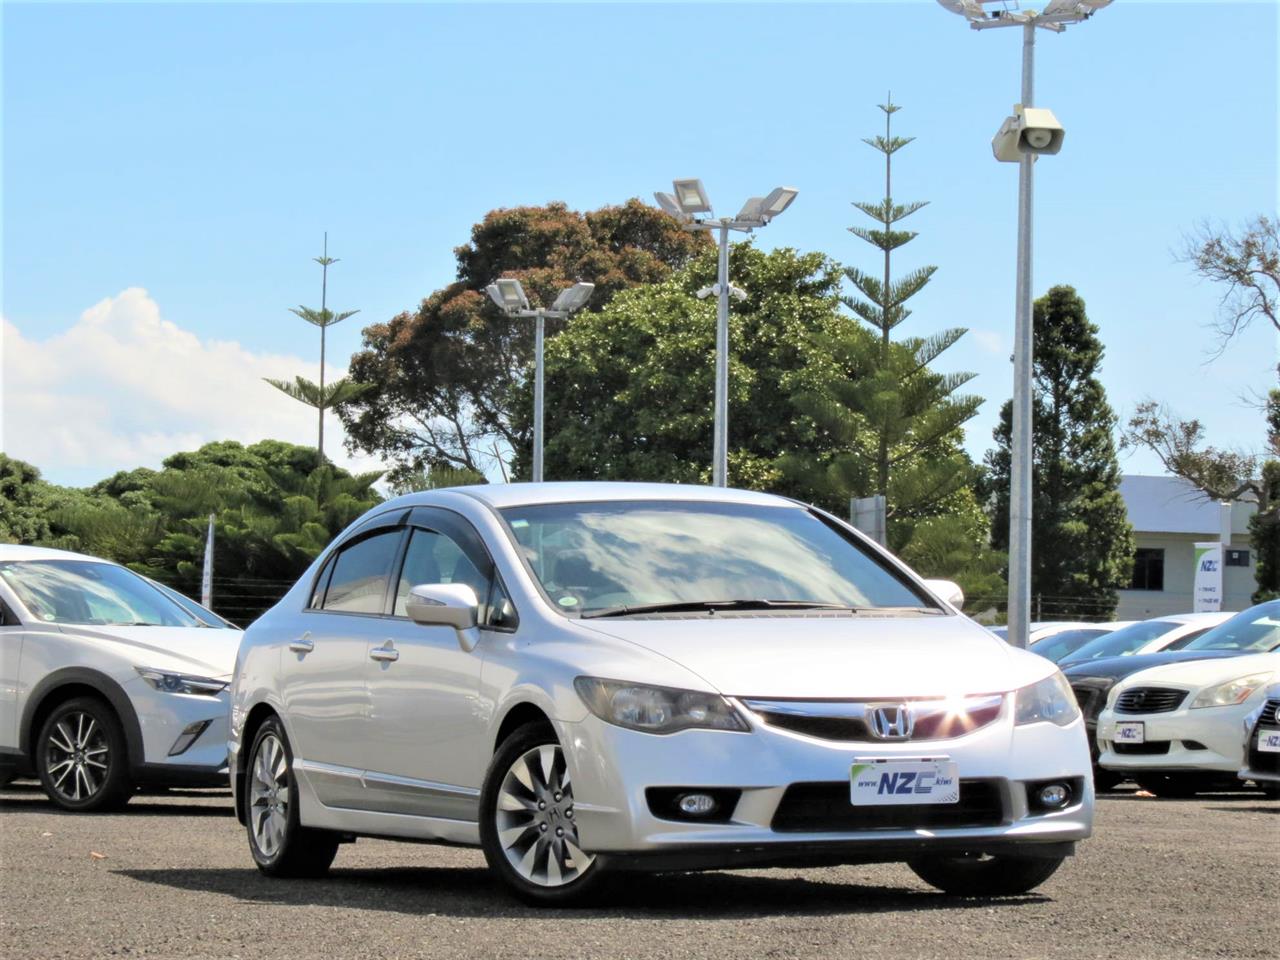 NZC 2009 Honda Civic just arrived to Auckland